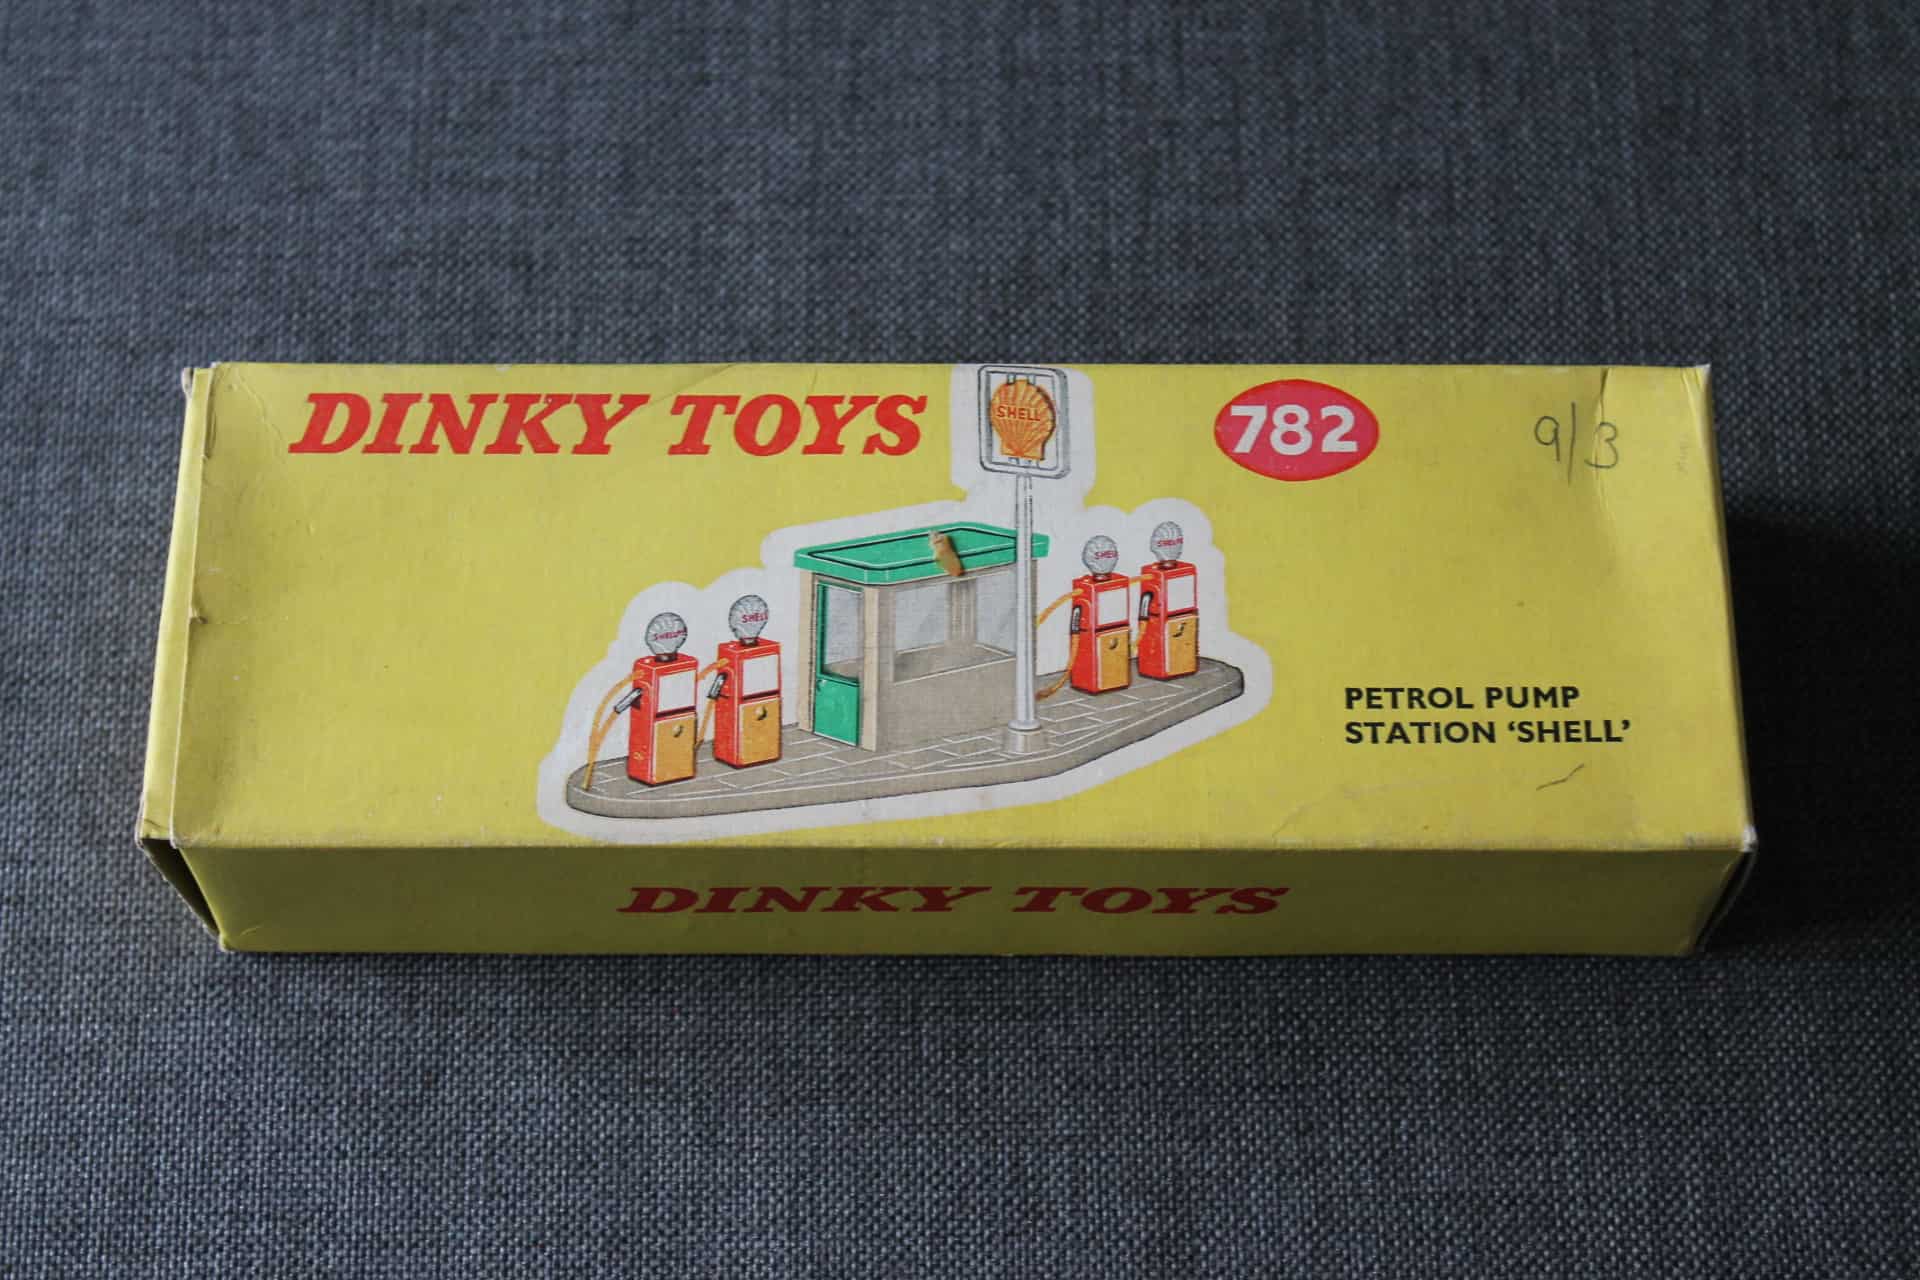 Dinky Toys 782 Petrol Pump Station 'Shell'